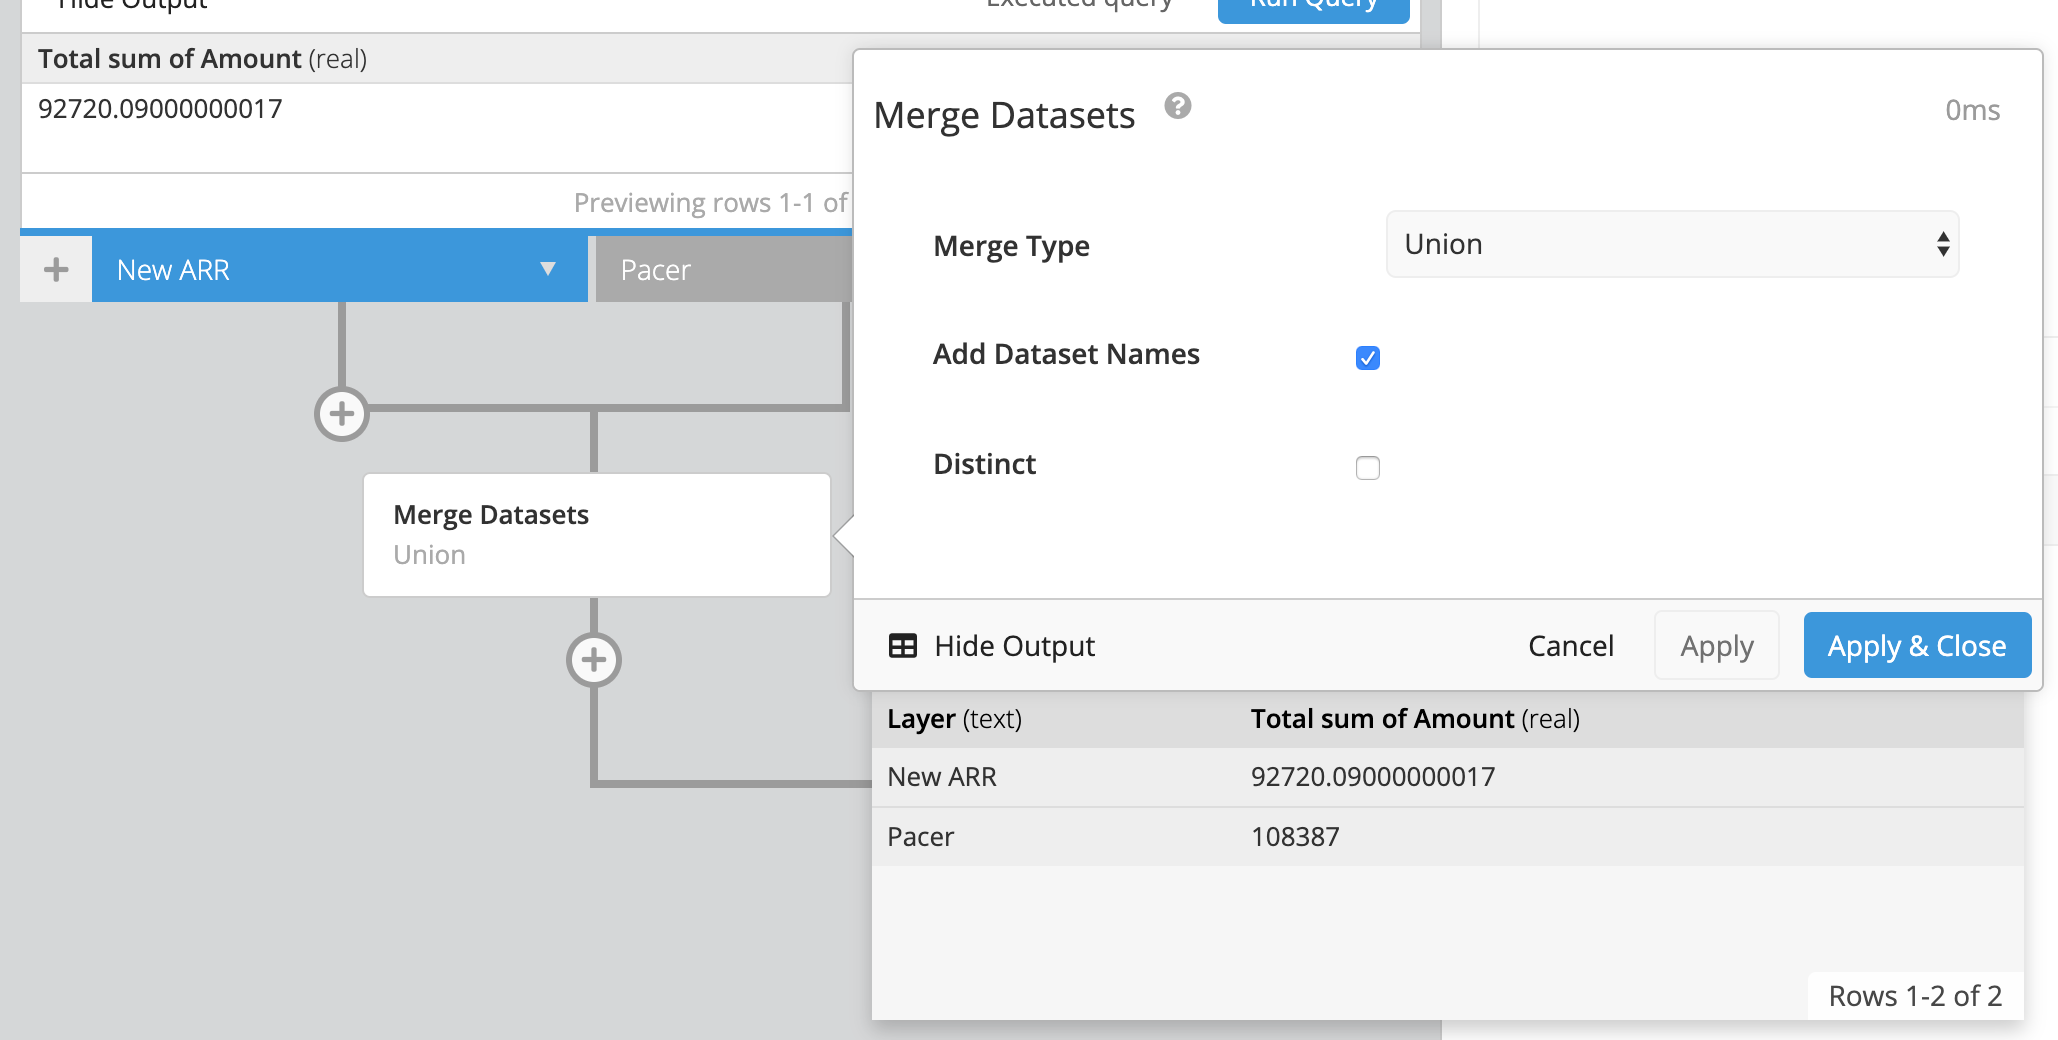 Merge in the Pipeline and select Add Dataset Names